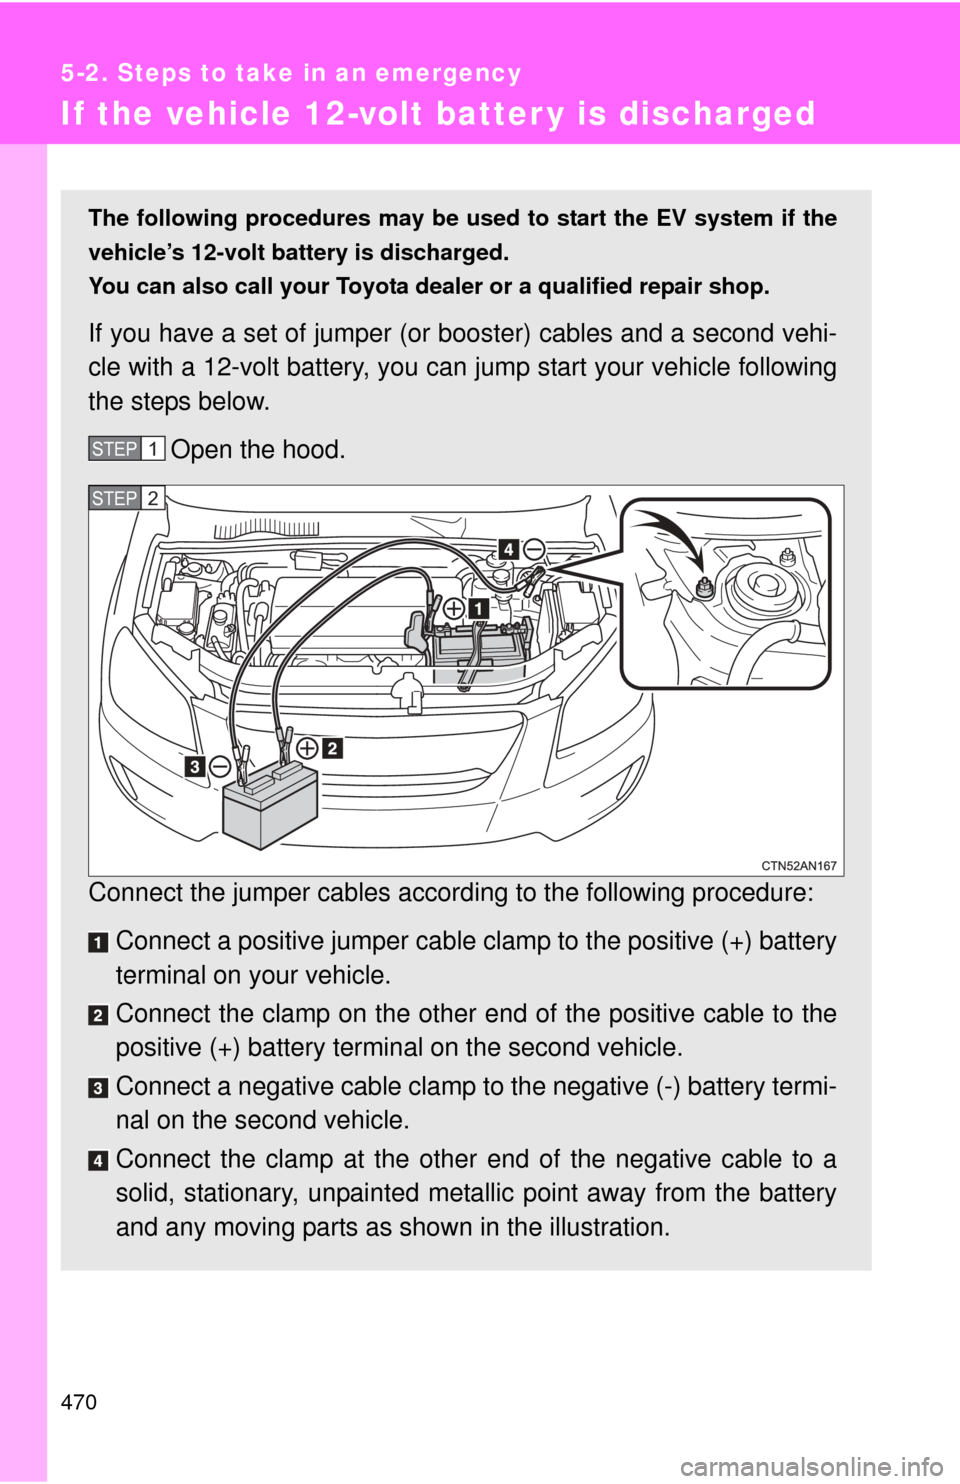 TOYOTA RAV4 EV 2014 1.G Owners Manual 470
5-2. Steps to take in an emergency
If the vehicle 12-volt batter y is discharged
The following procedures may be used to start the EV system if the
vehicle’s 12-volt battery is discharged.
You c